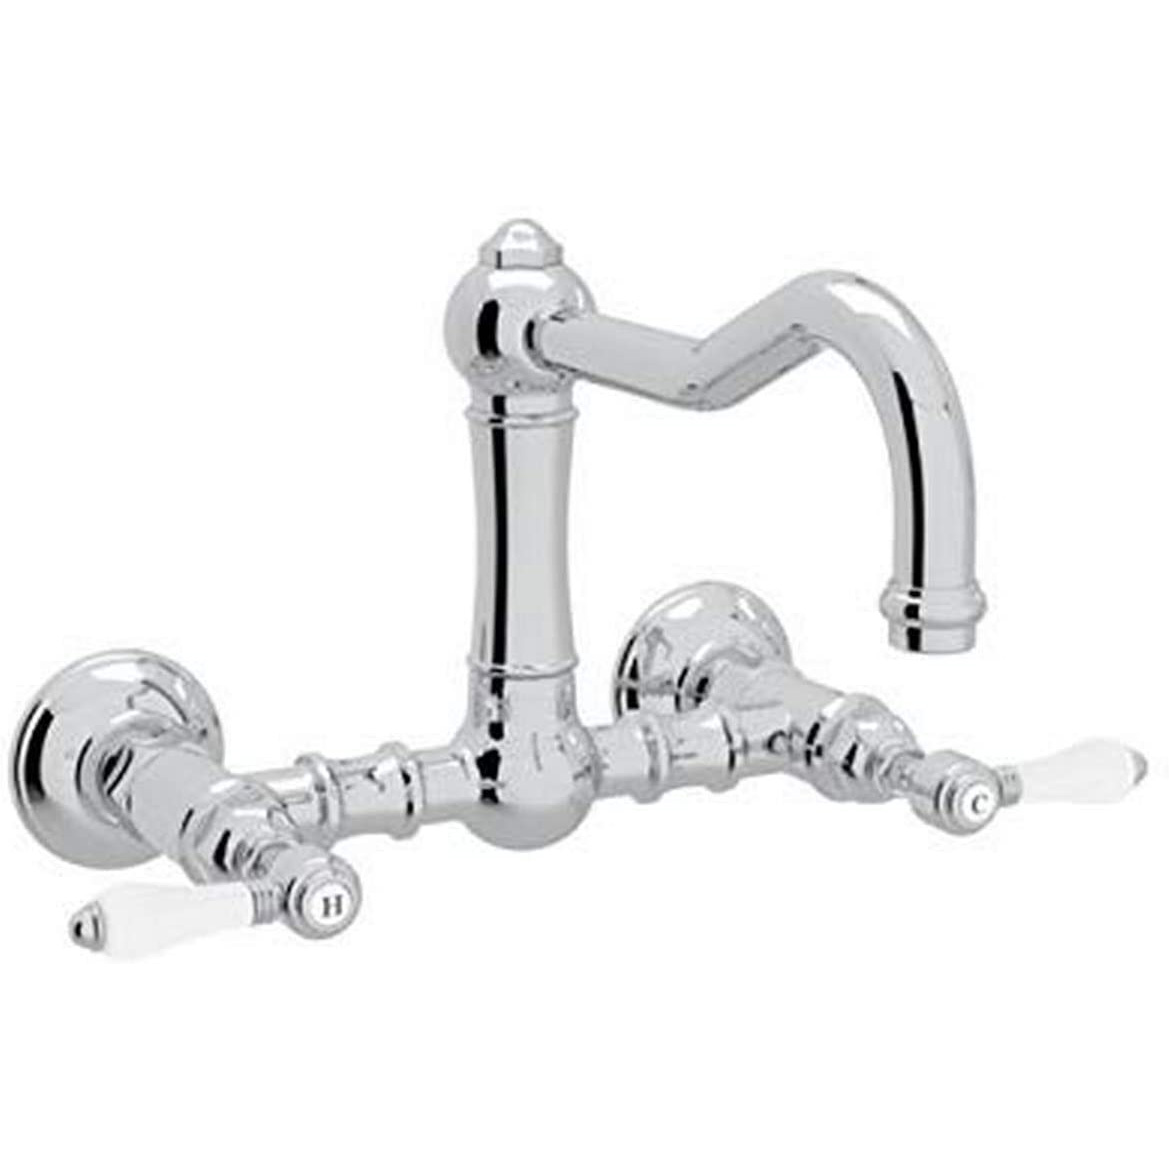 Country Bridge Faucet w/Porcelain Handles in Polished Chrome